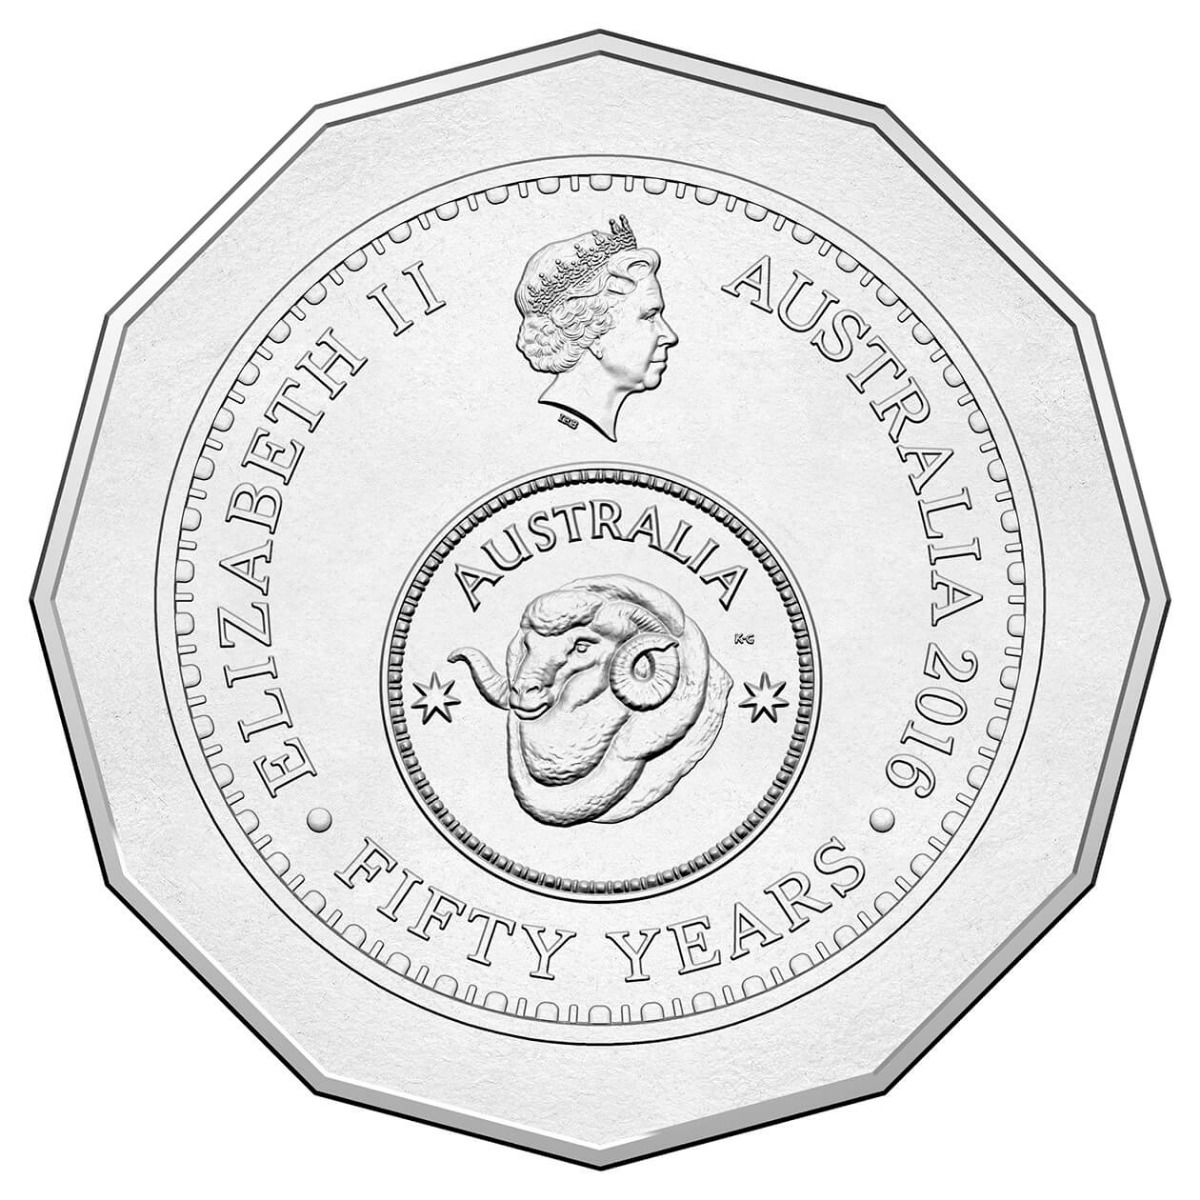 2016 Australian Uncirculated Coins - 50th Anniversary of Decimal Currency  - UNCIRCULATED from Royal Australian Mint Roll - Loose Change Coins